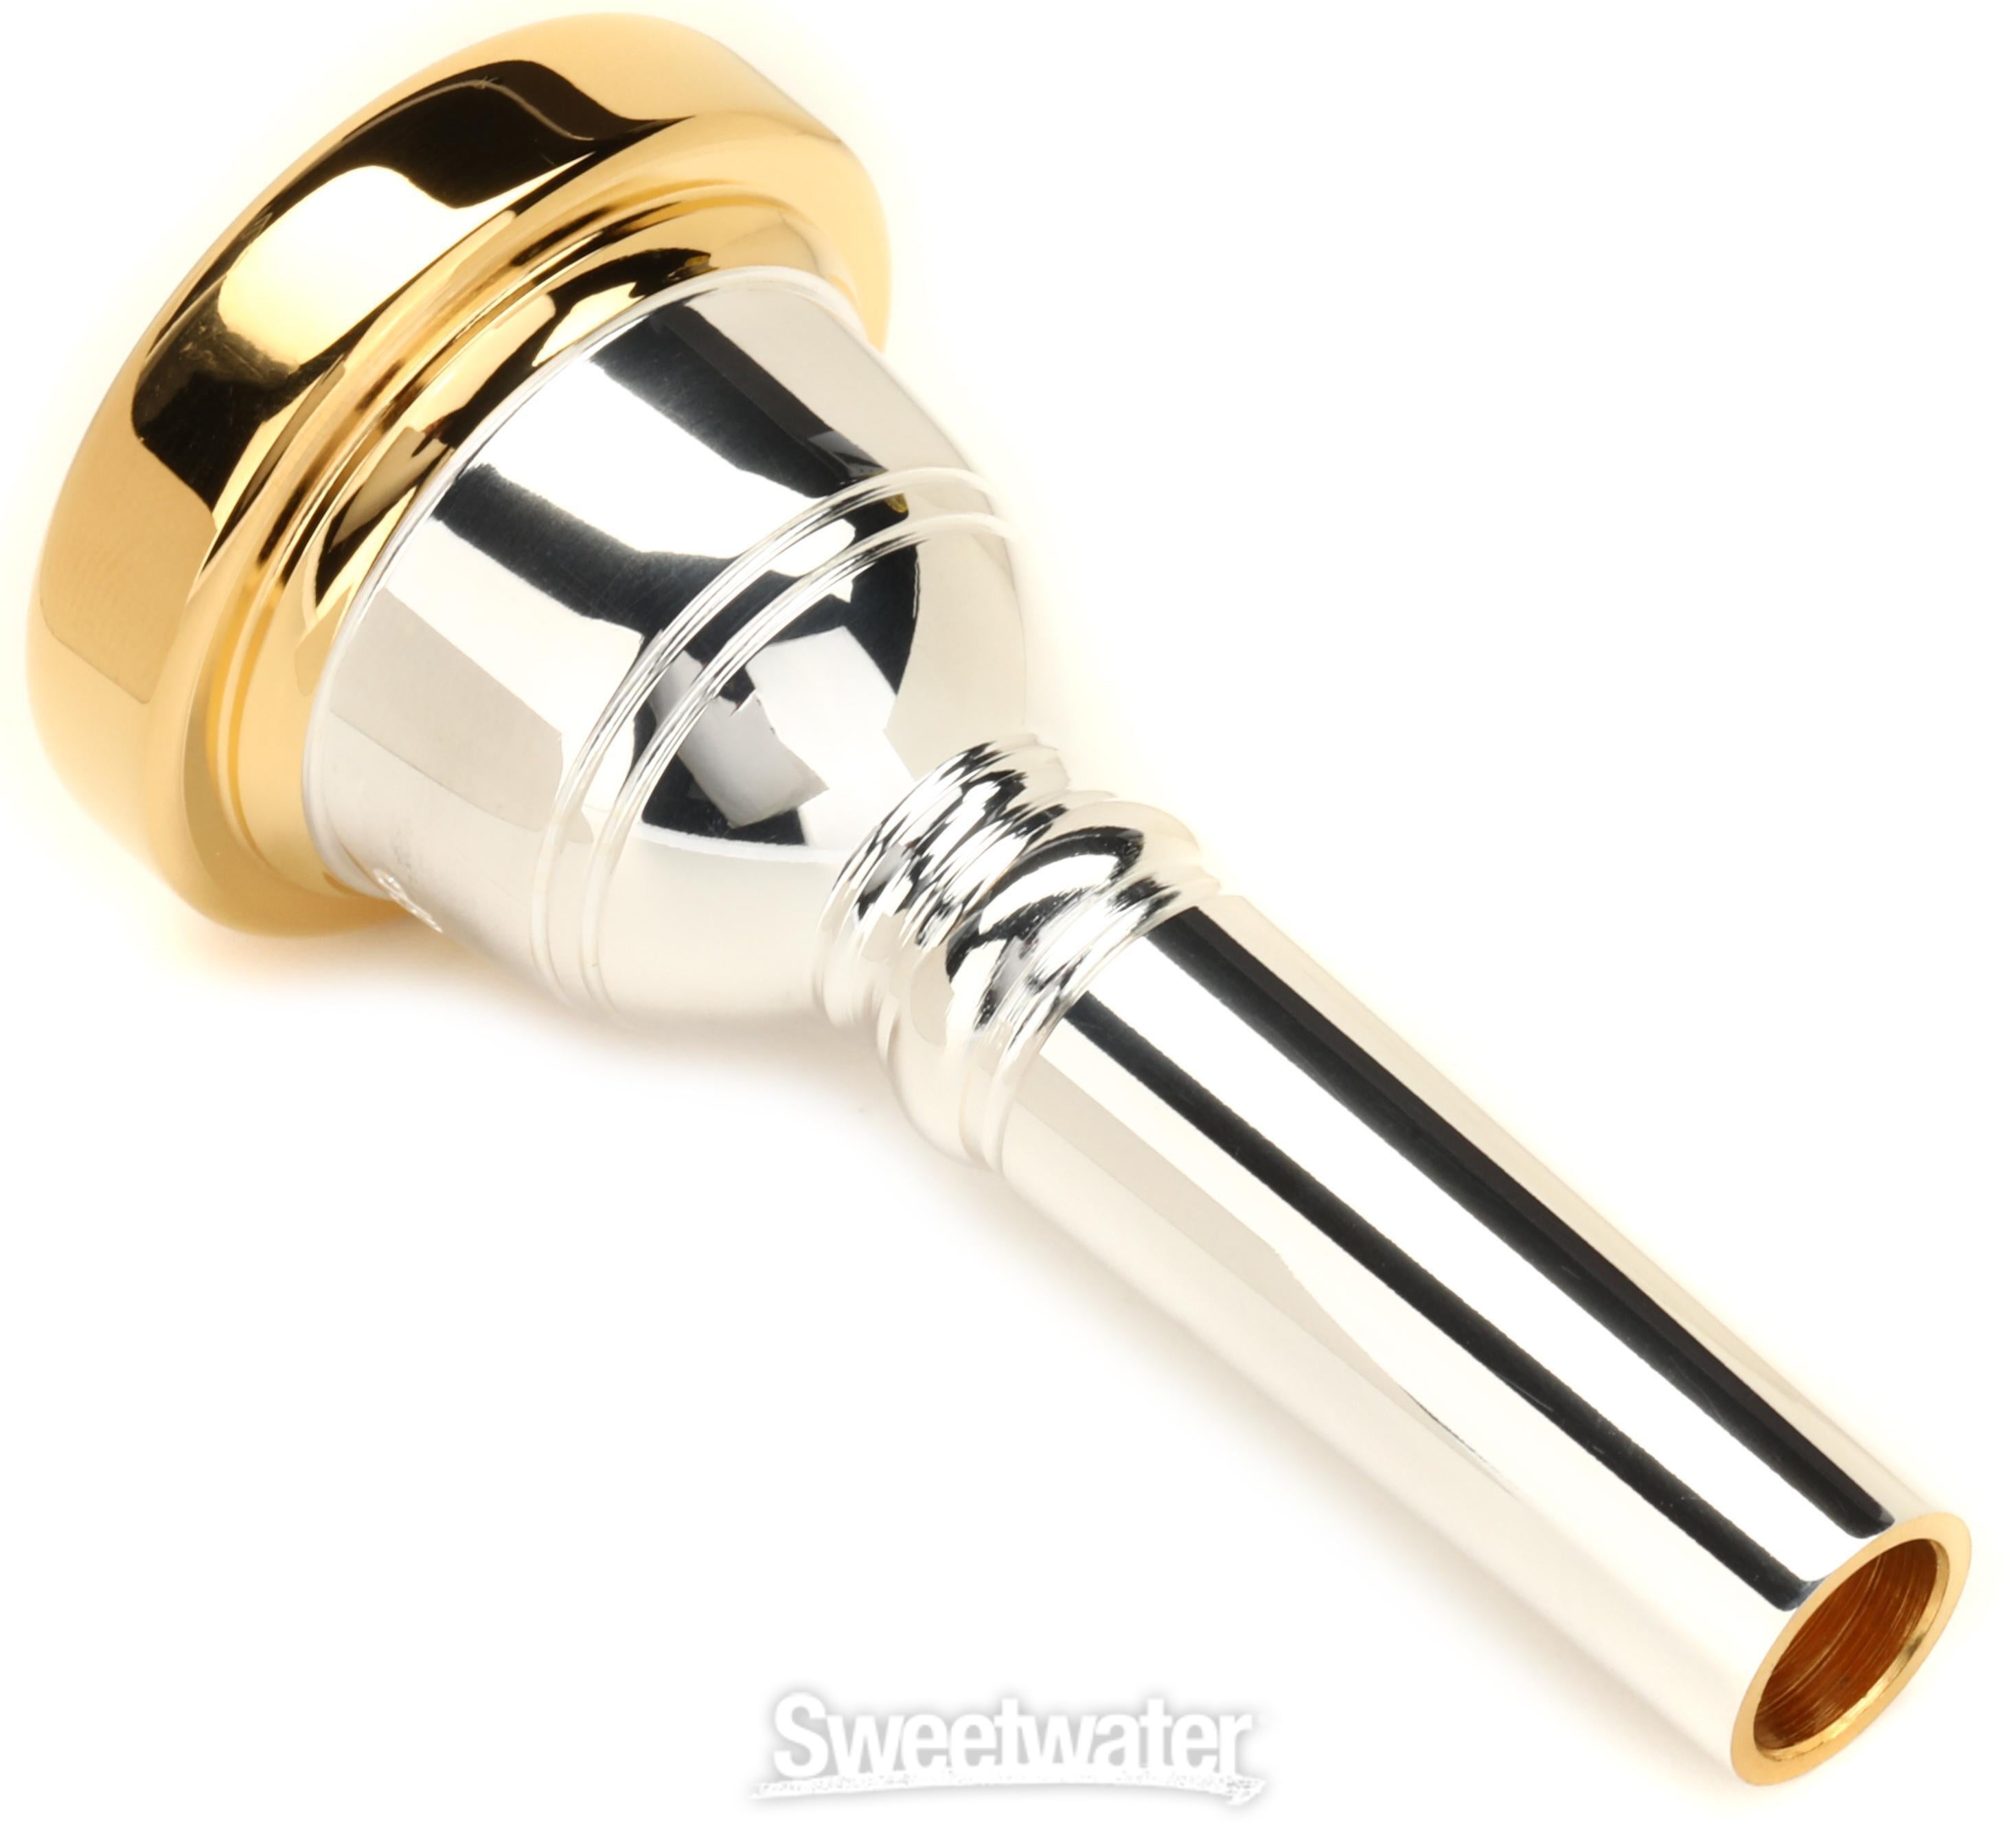 Yamaha Large Shank Trombone Mouthpiece - 48 with Gold-plated Rim and Cup